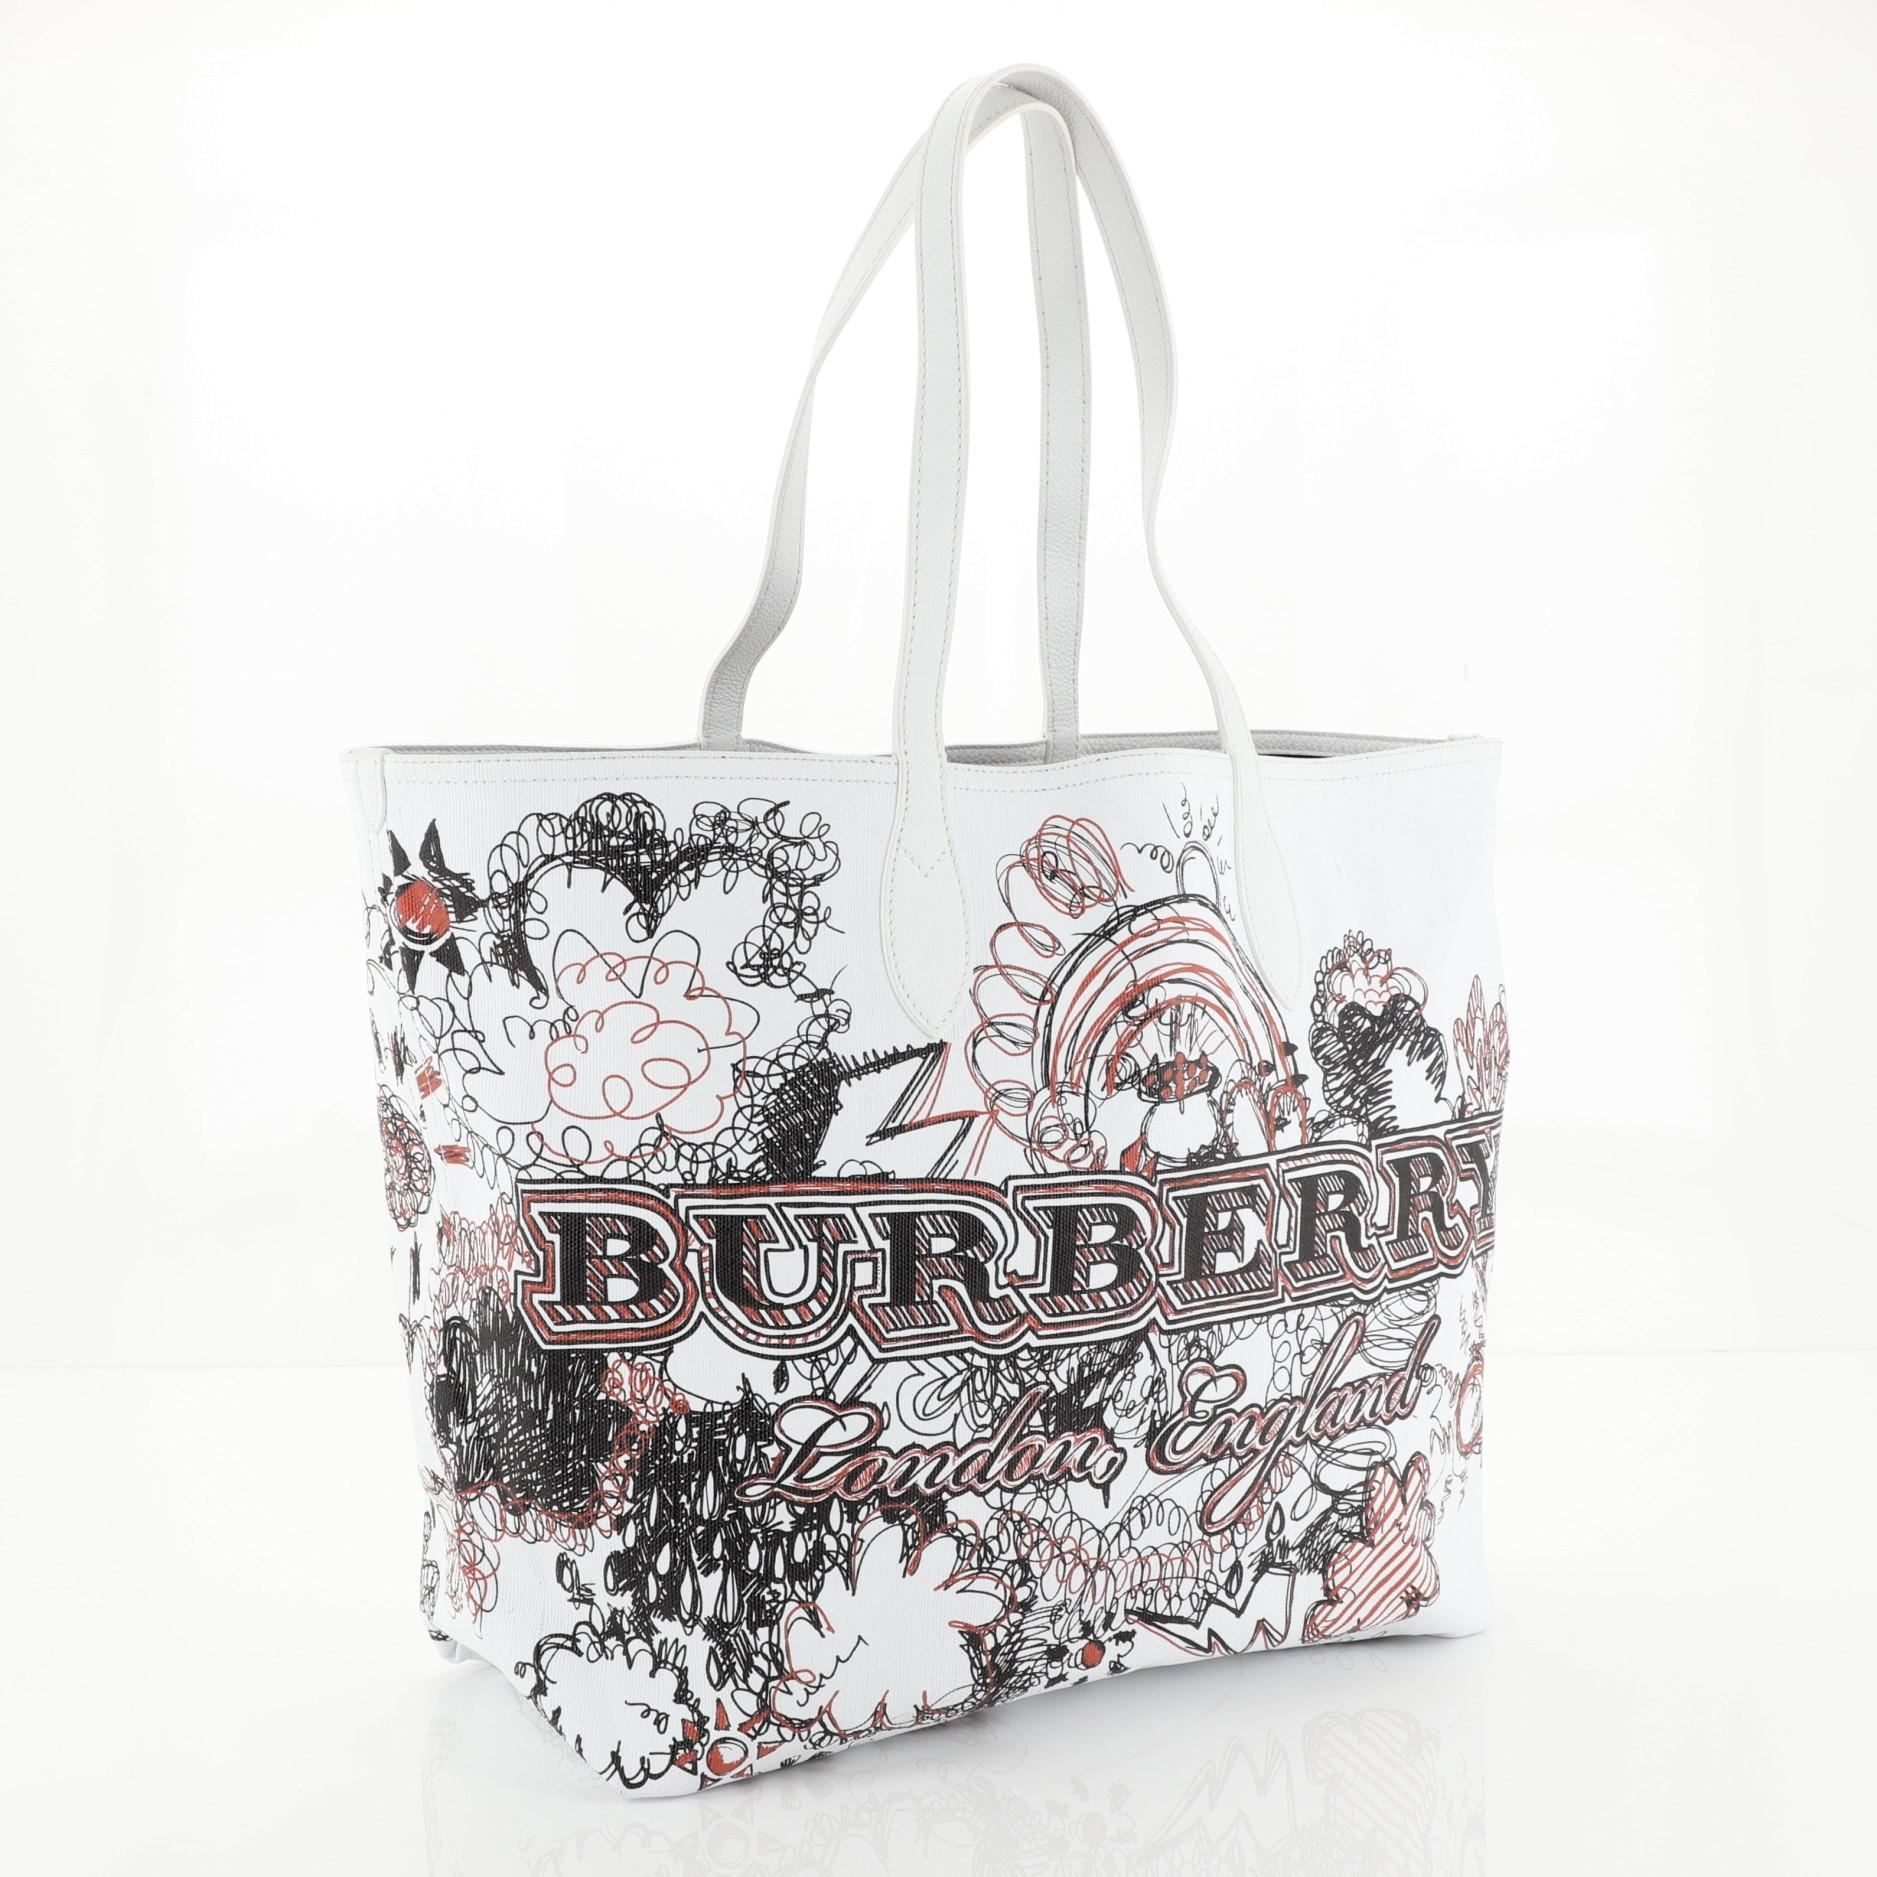 This Burberry Doodle Reversible Tote Printed Canvas Large, crafted from white printed coated canvas, features dual top handles. It opens to a reversible brown House Check canvas interior. 

Estimated Retail Price: $795
Condition: Great. Minor wear